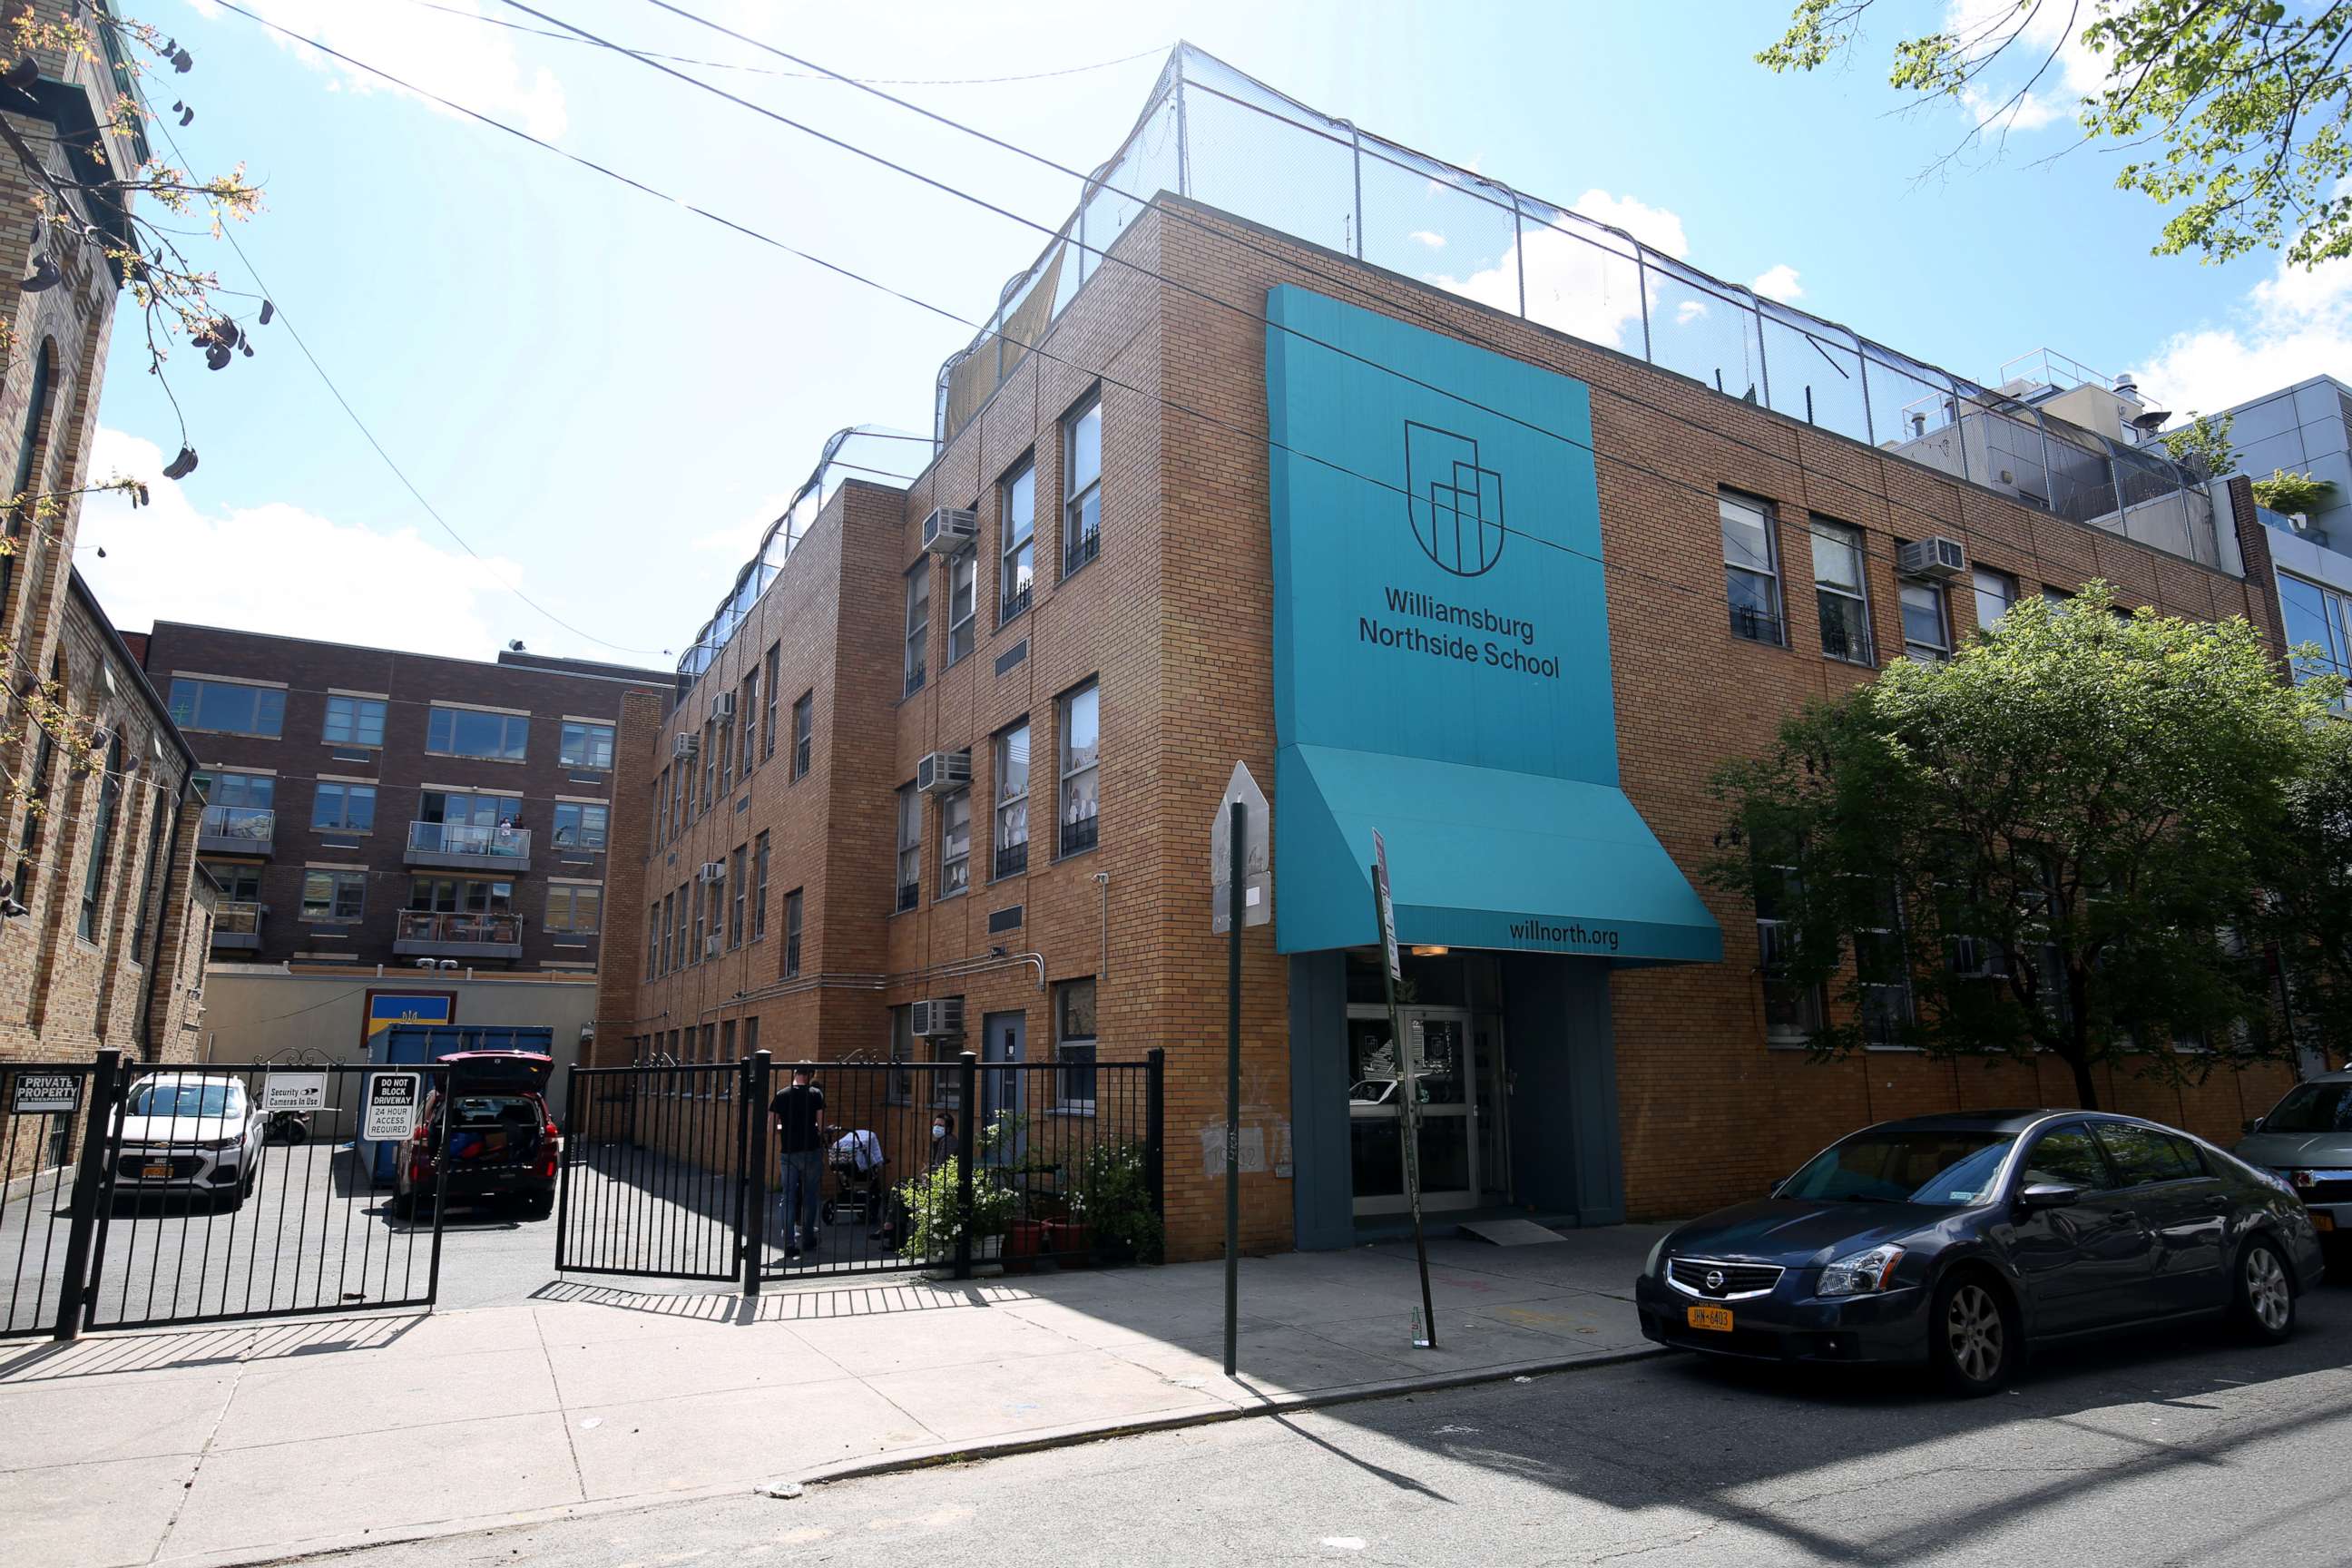 PHOTO: A view of a school in the Williamsburg neighborhood of Brooklyn during the coronavirus pandemic, May 7, 2020, in New York City.